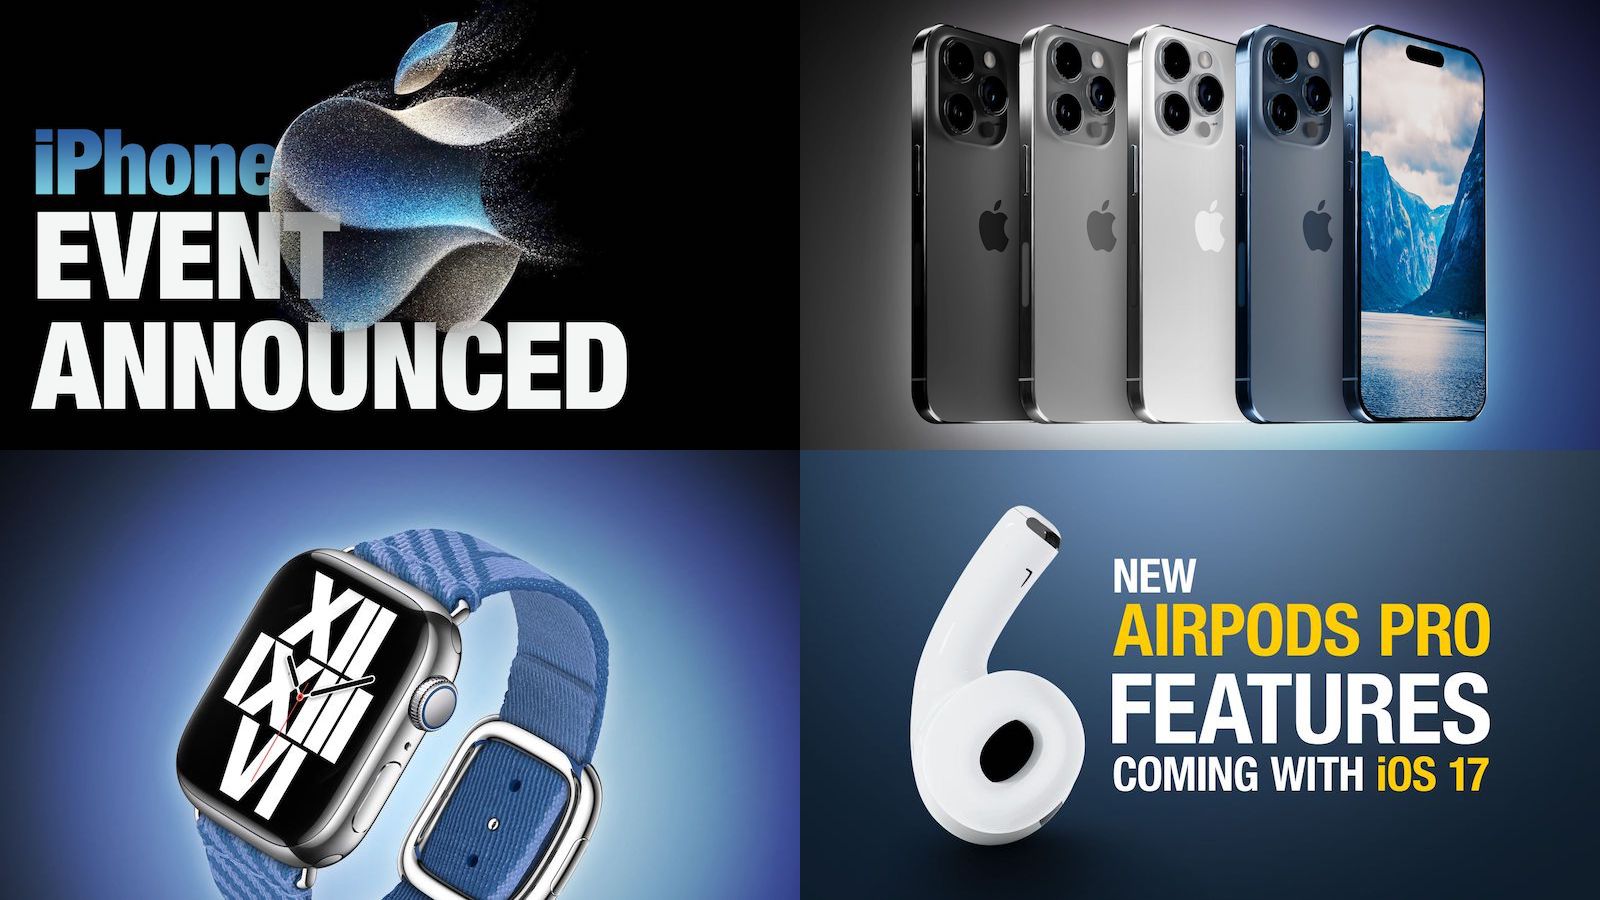 Top stories: Apple event announced for iPhone 15, new Apple Watches, AirPods USB-C headphones, and more